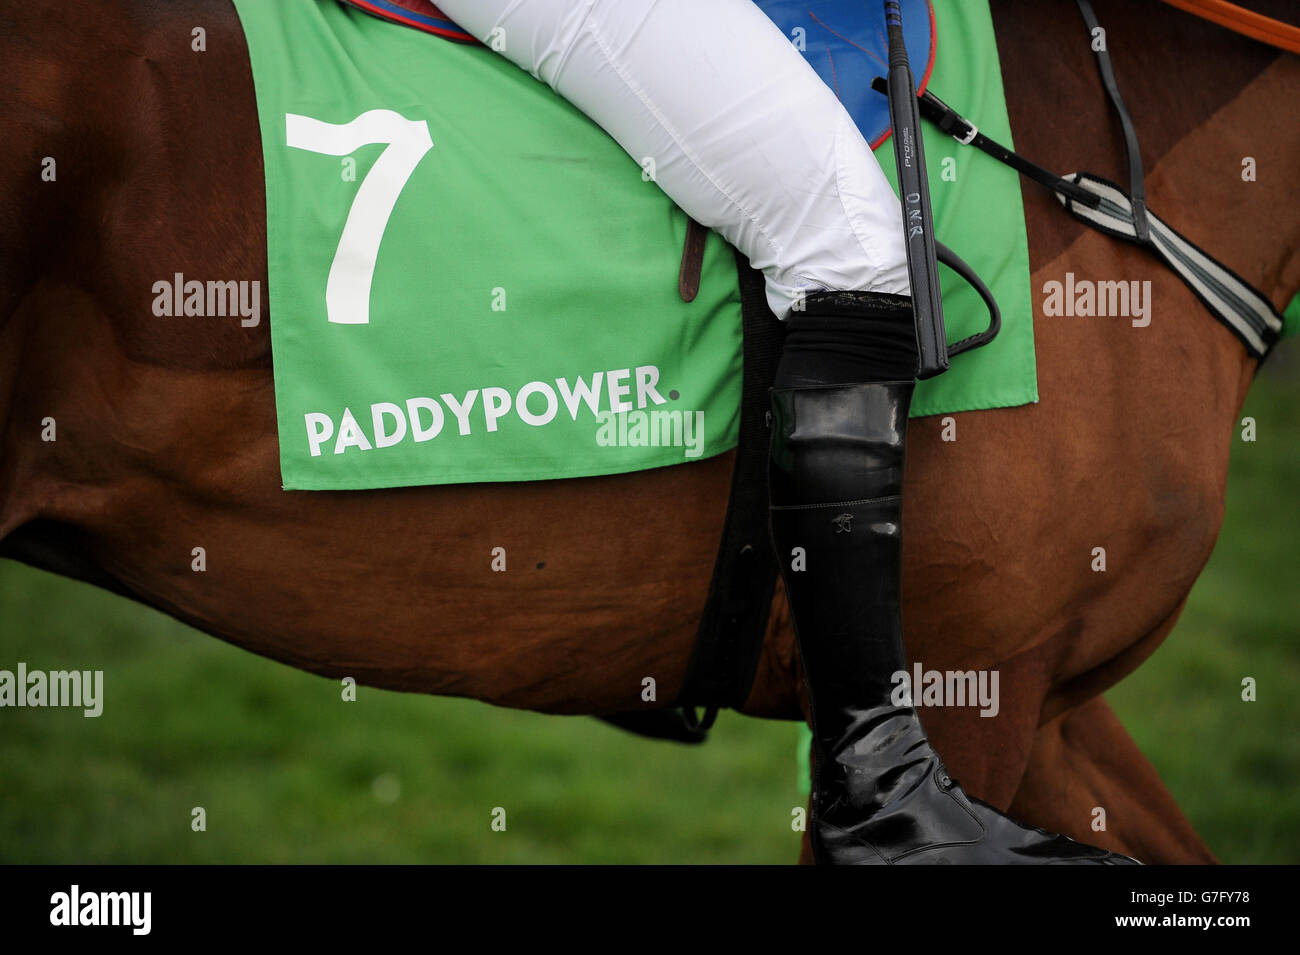 Horse Racing - The Open - Day Two - Cheltenham Racecourse. Detail of a saddlecloth with Paddypower branding at Cheltenham Racecourse Stock Photo